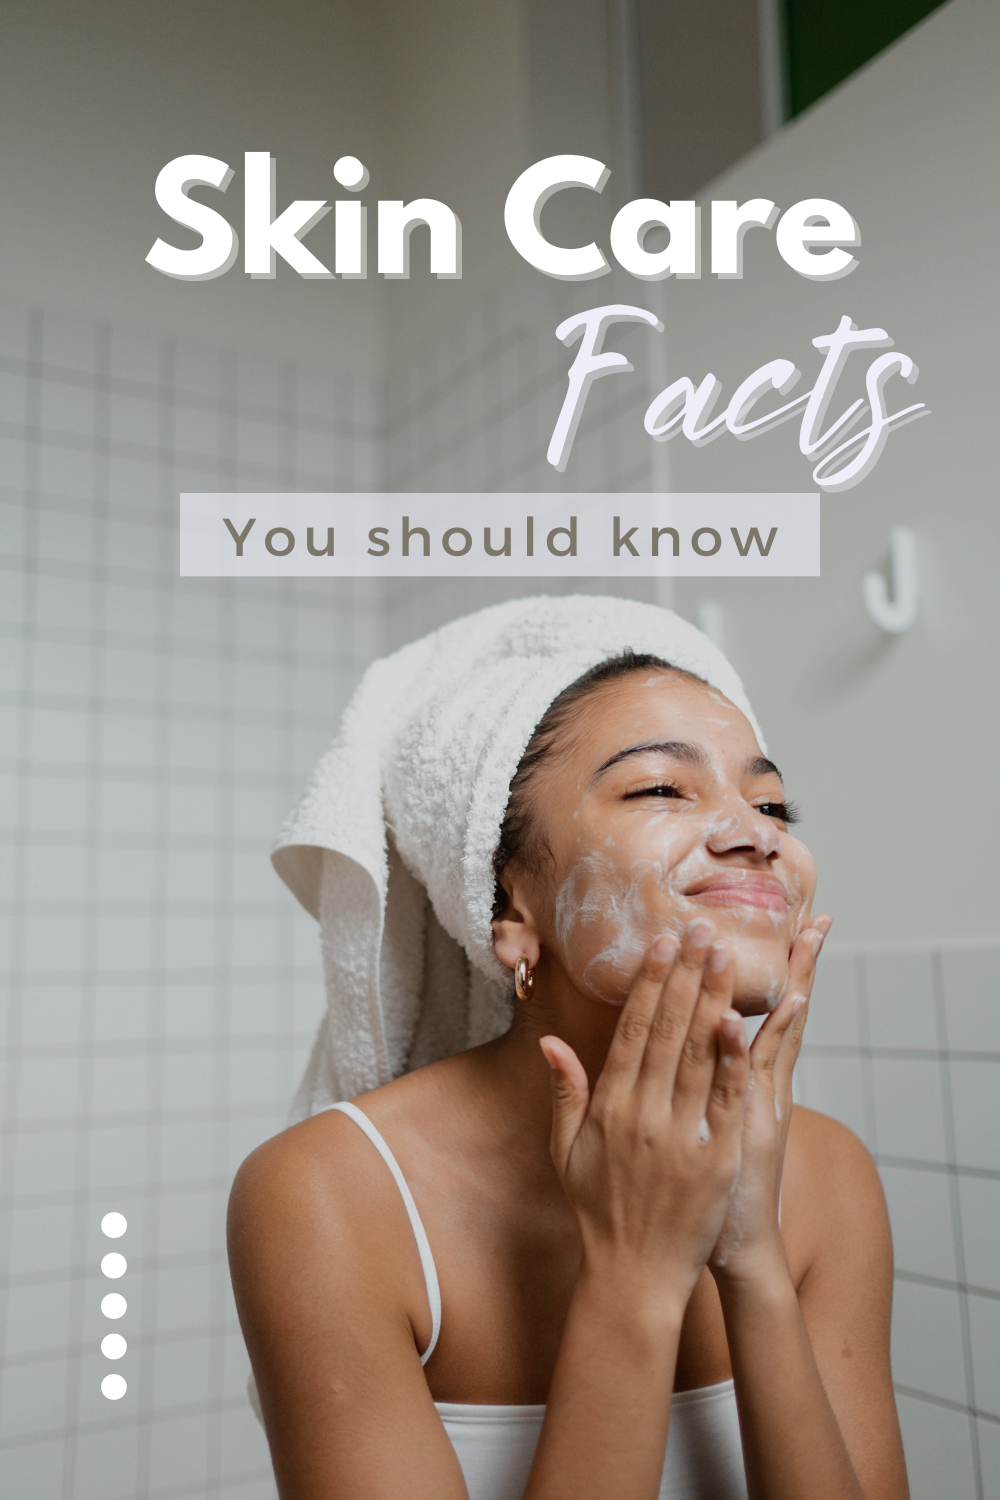 How to start your skincare journey and How to find the right skincare?